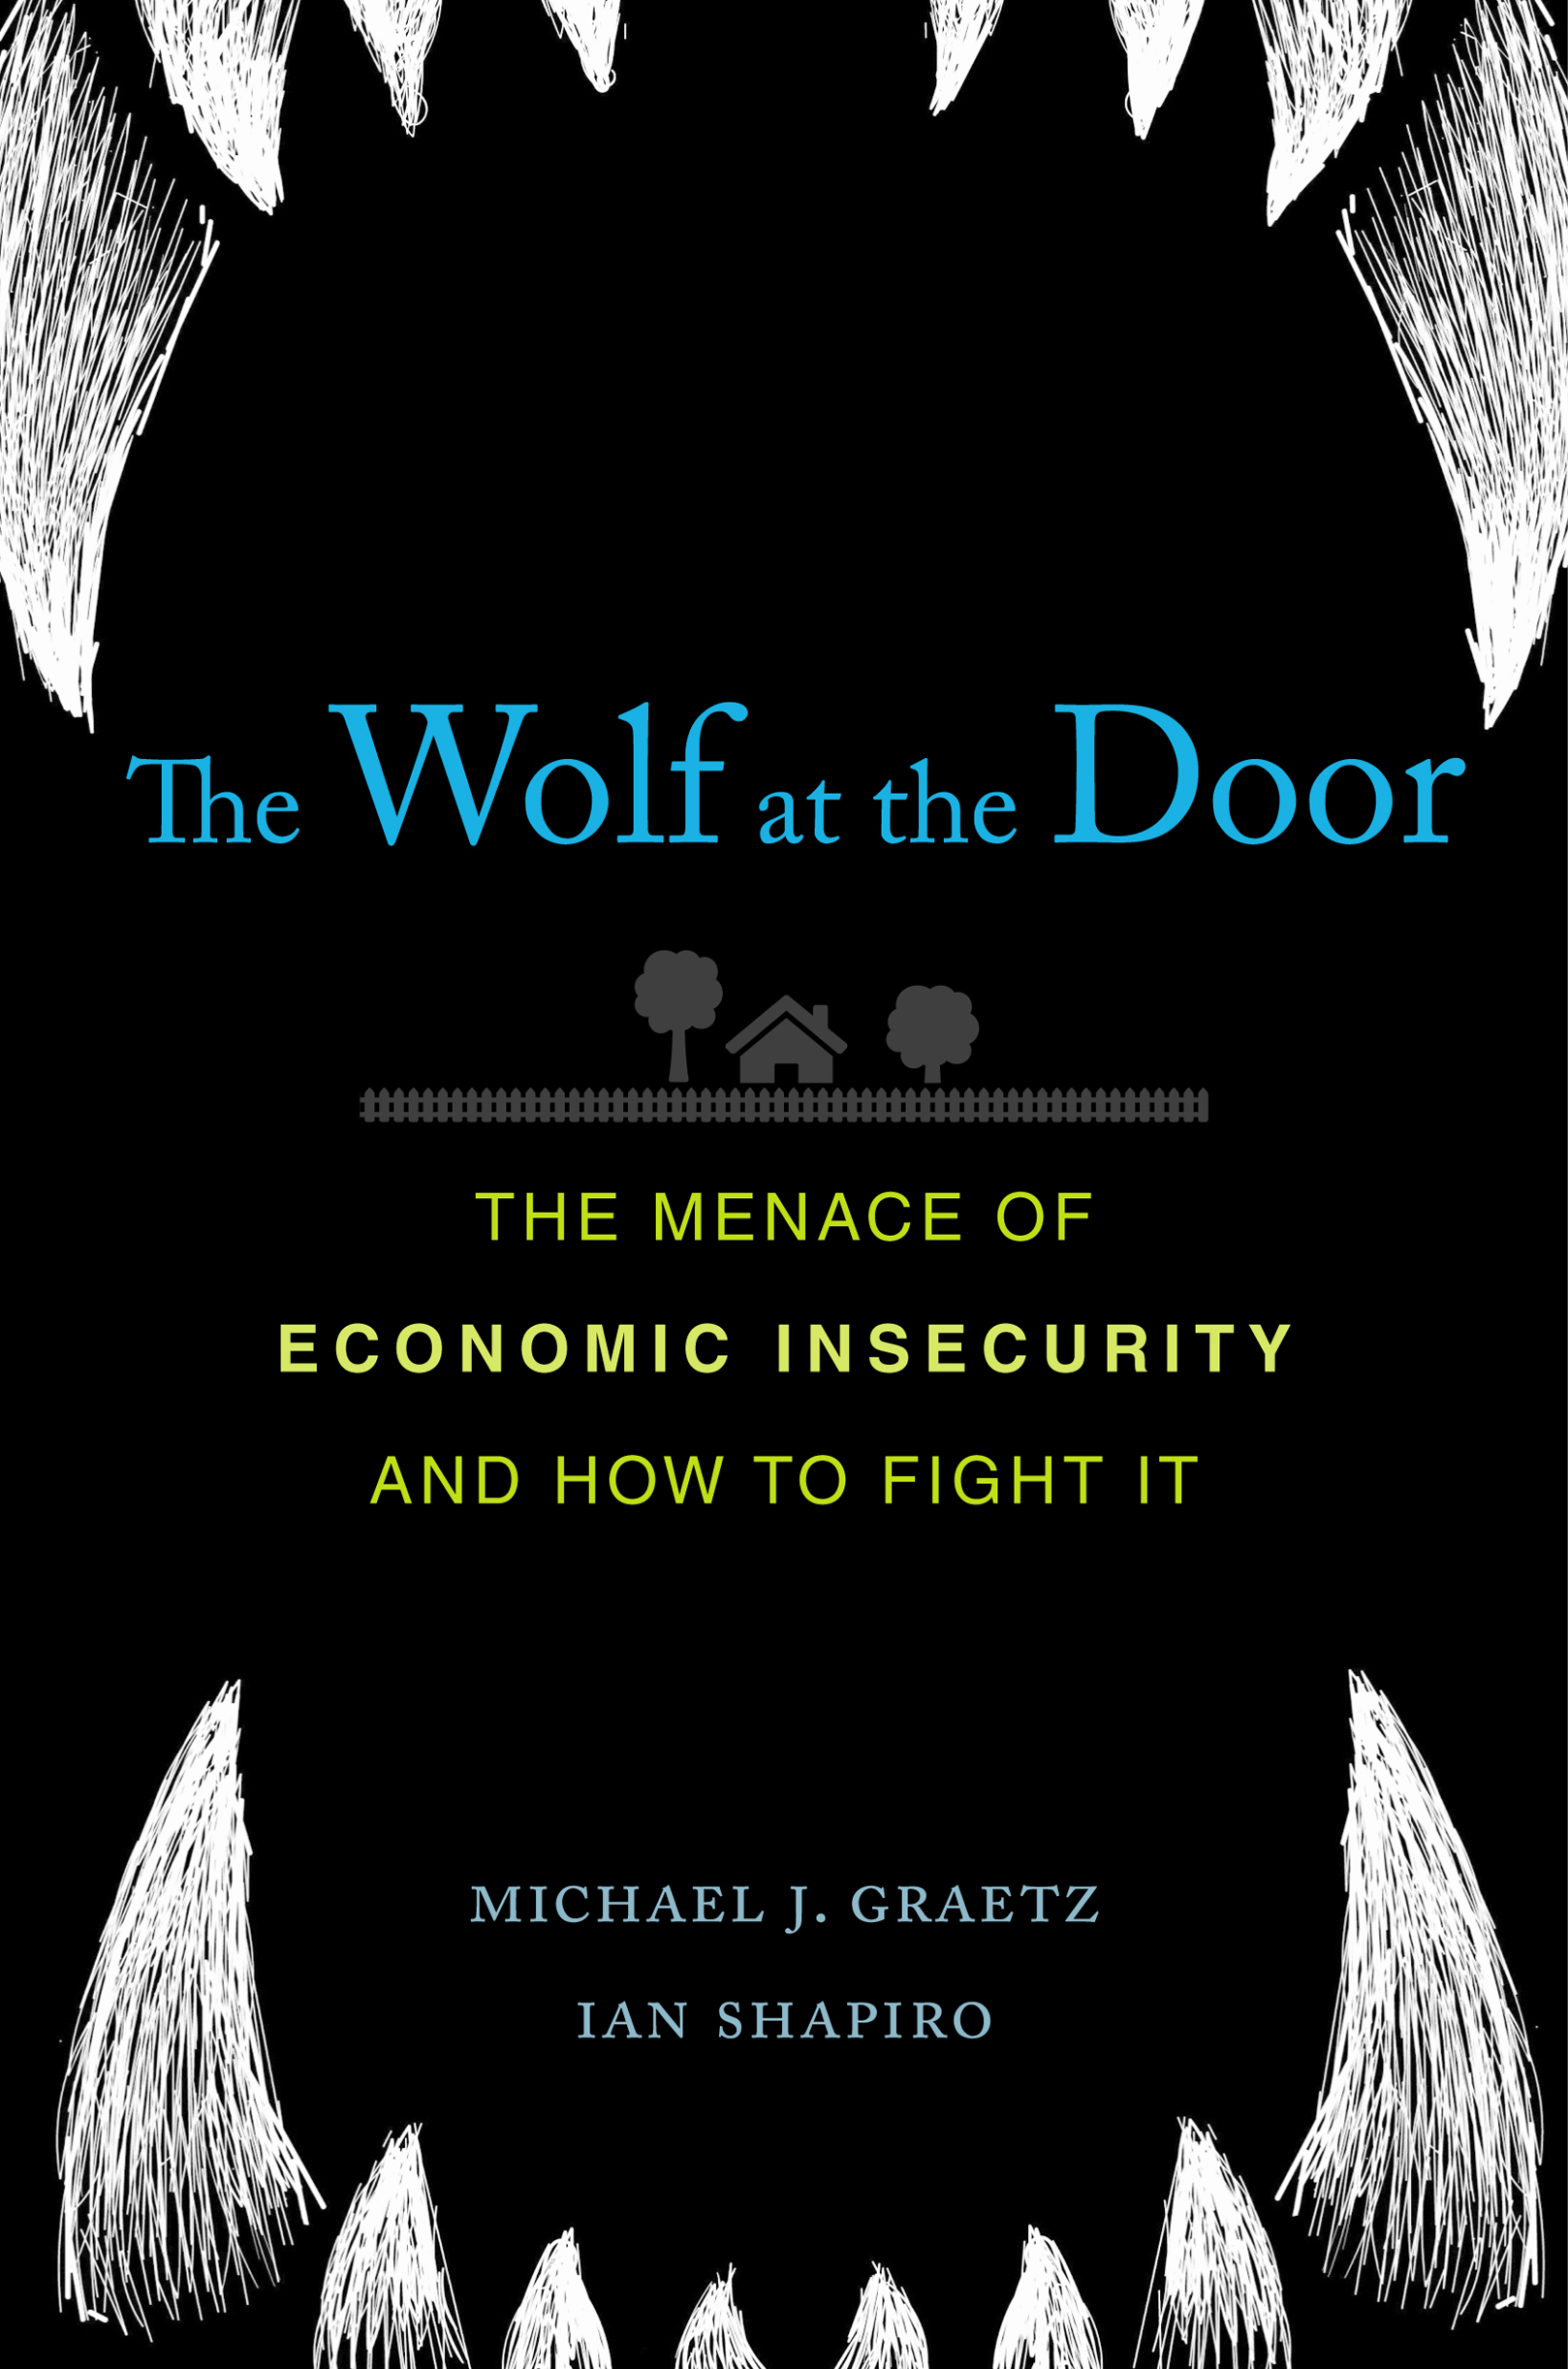 The Wolf at the Door THE MENACE OF ECONOMIC INSECURITY AND HO W TO IGHT IT - photo 1